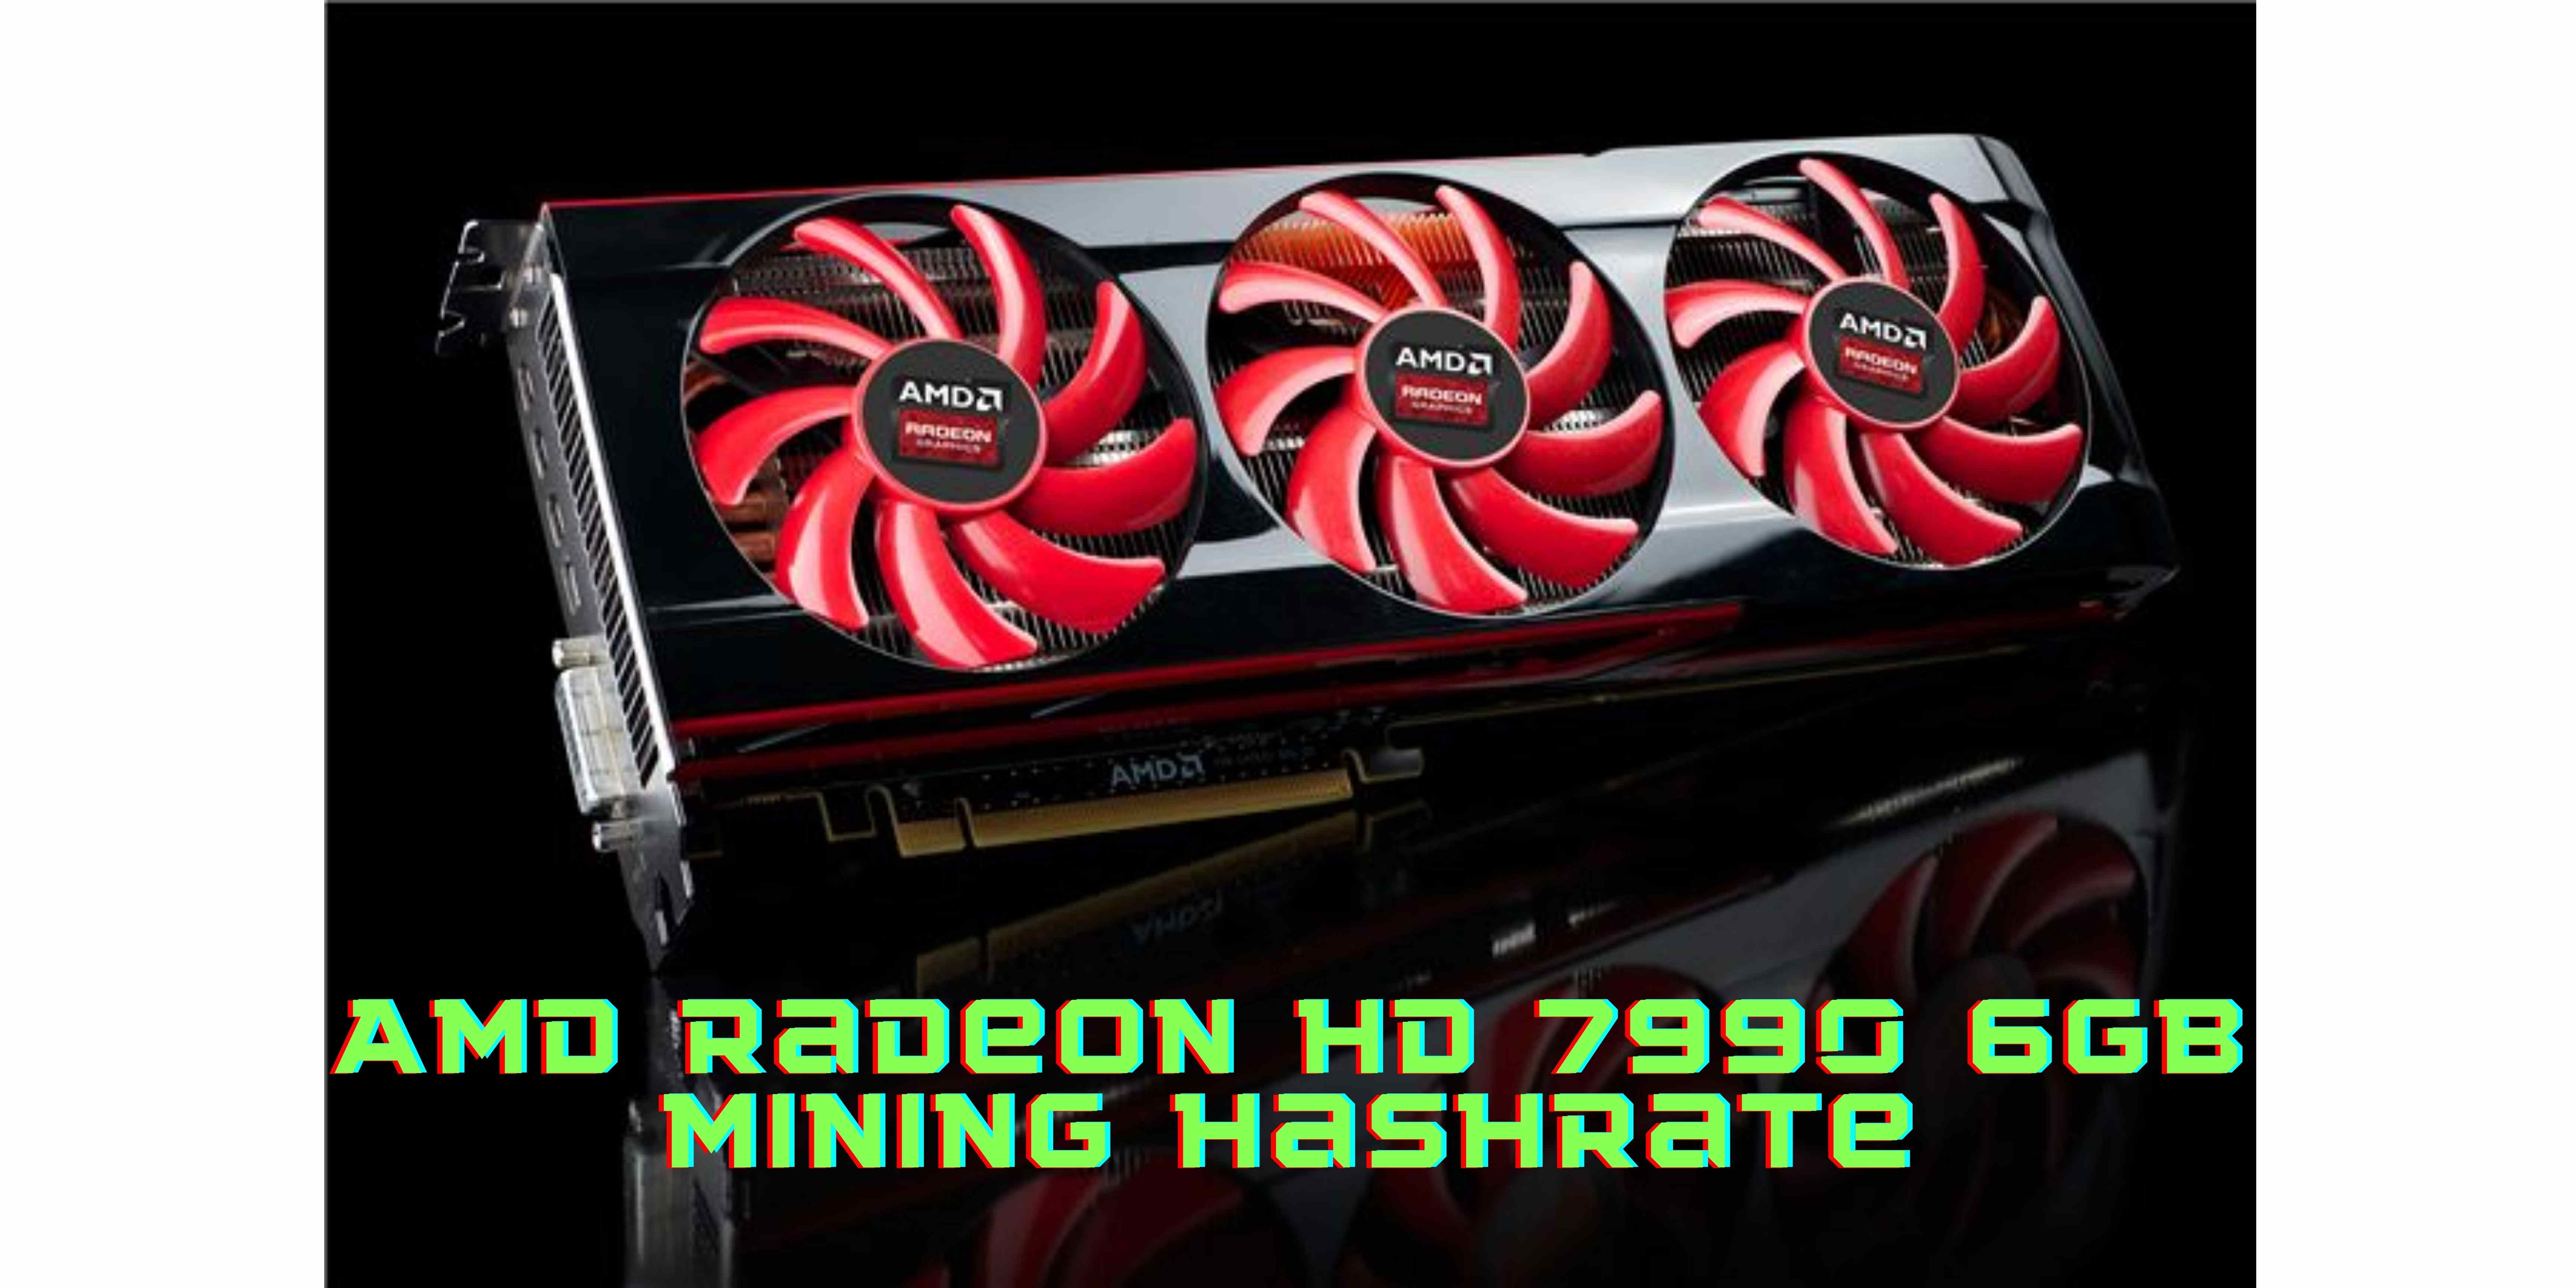 There Is Nothing Like The AMD Radeon HD 7990 6GB Mining Hashrate!